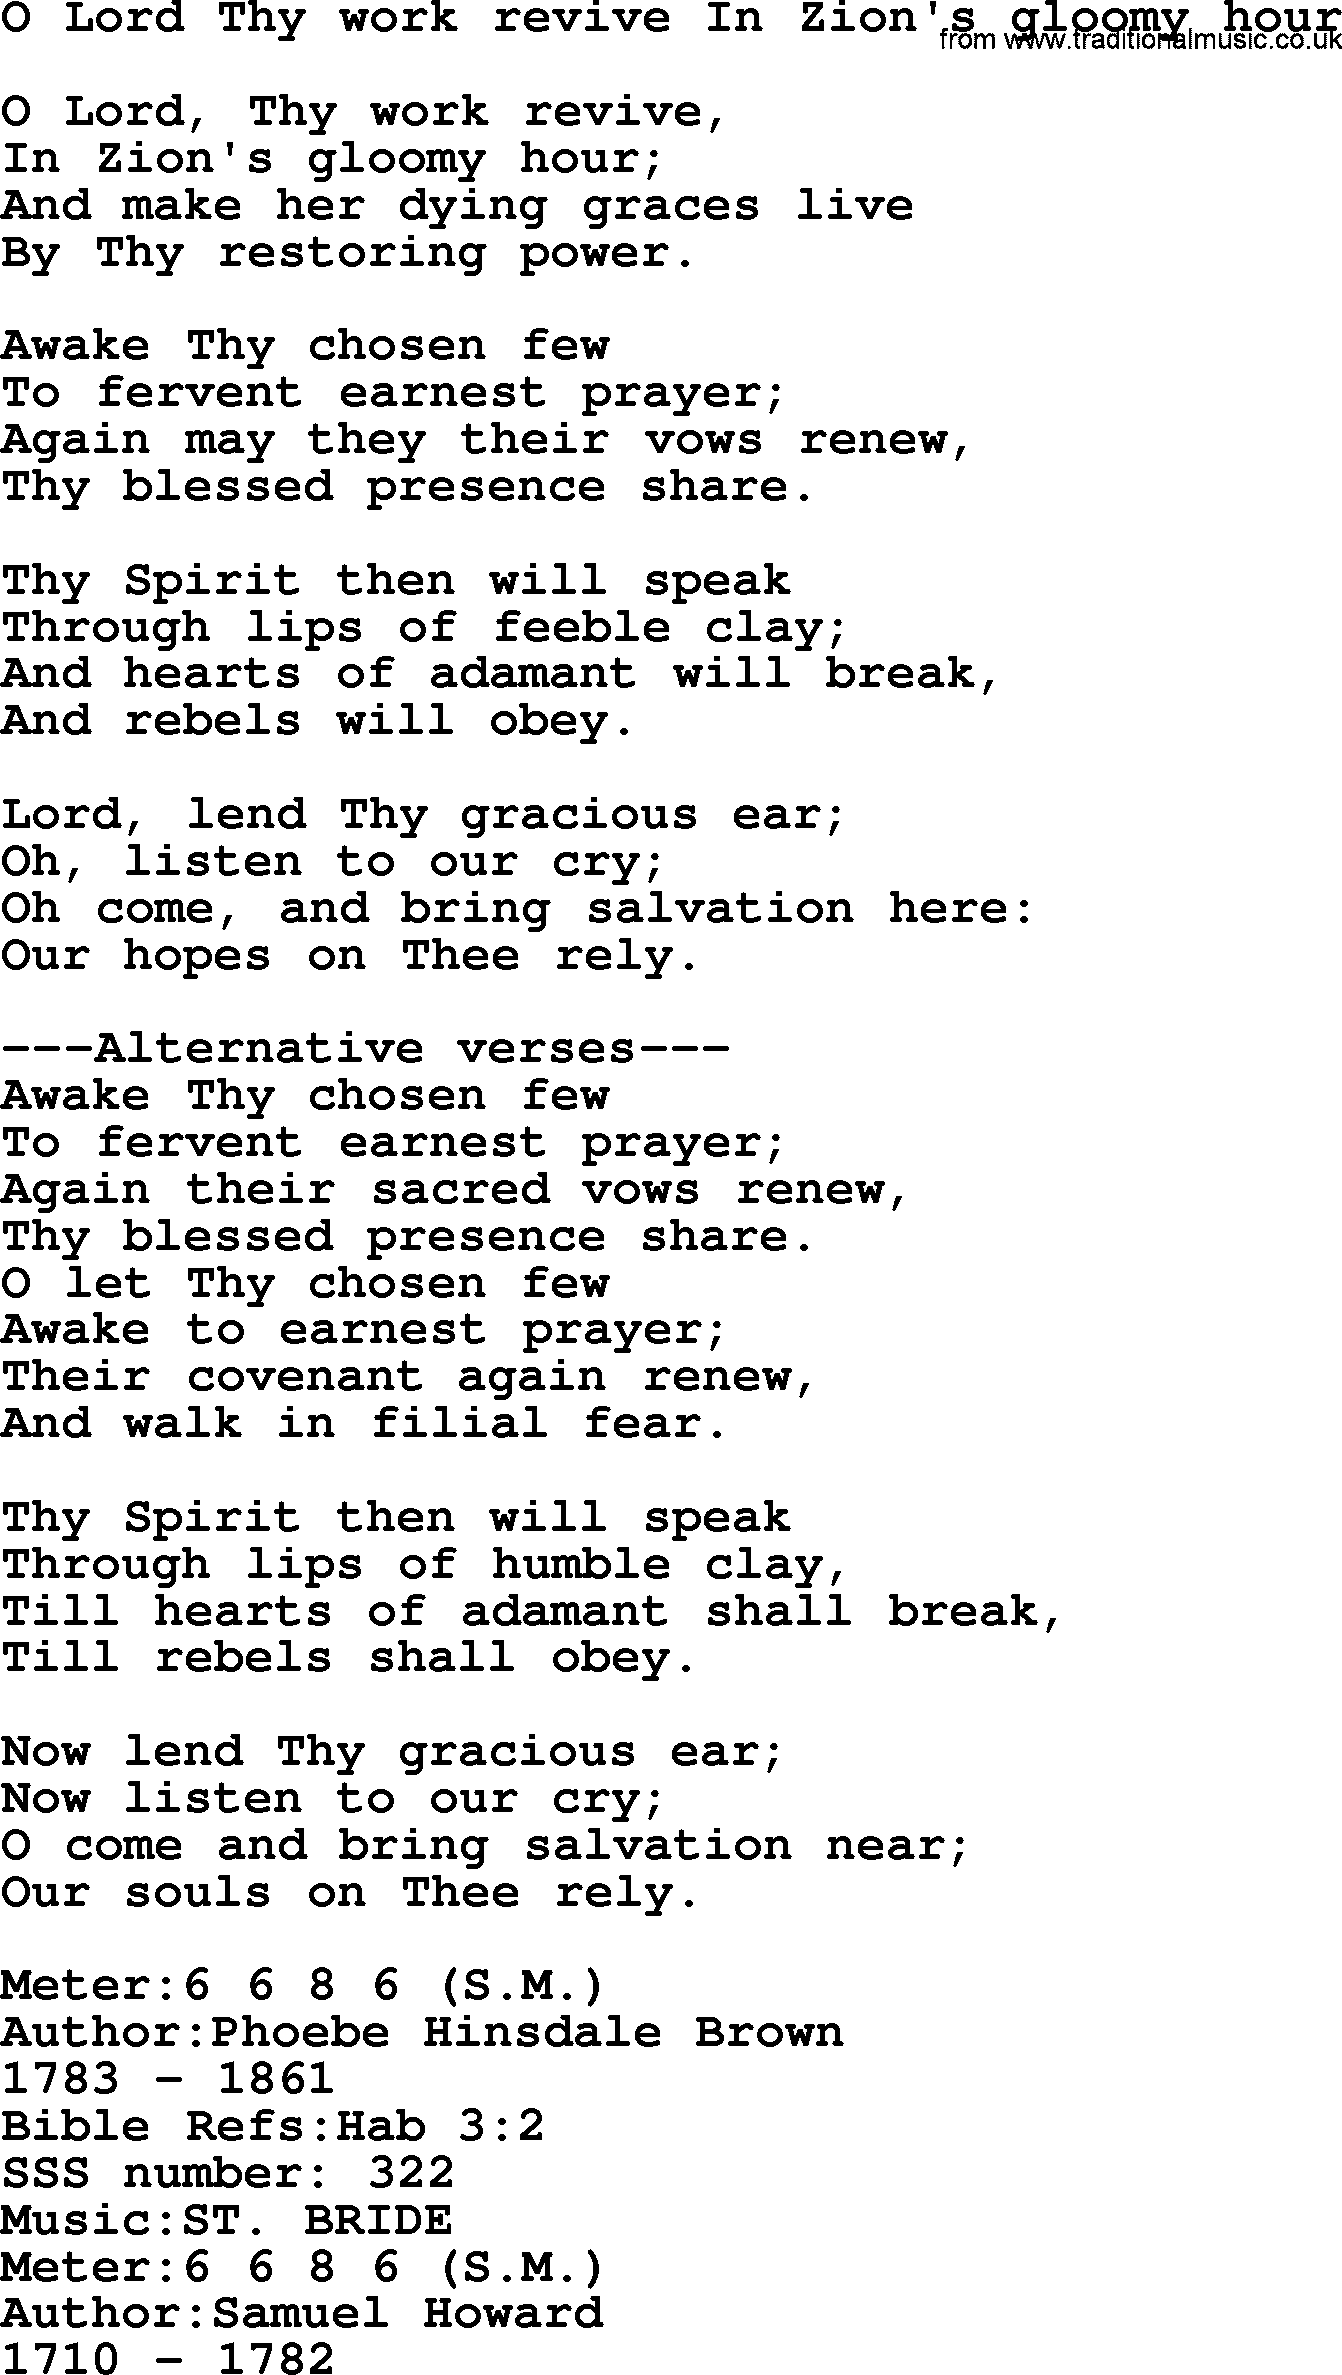 Sacred Songs and Solos complete, 1200 Hymns, title: O Lord Thy Work Revive In Zion's Gloomy Hour, lyrics and PDF